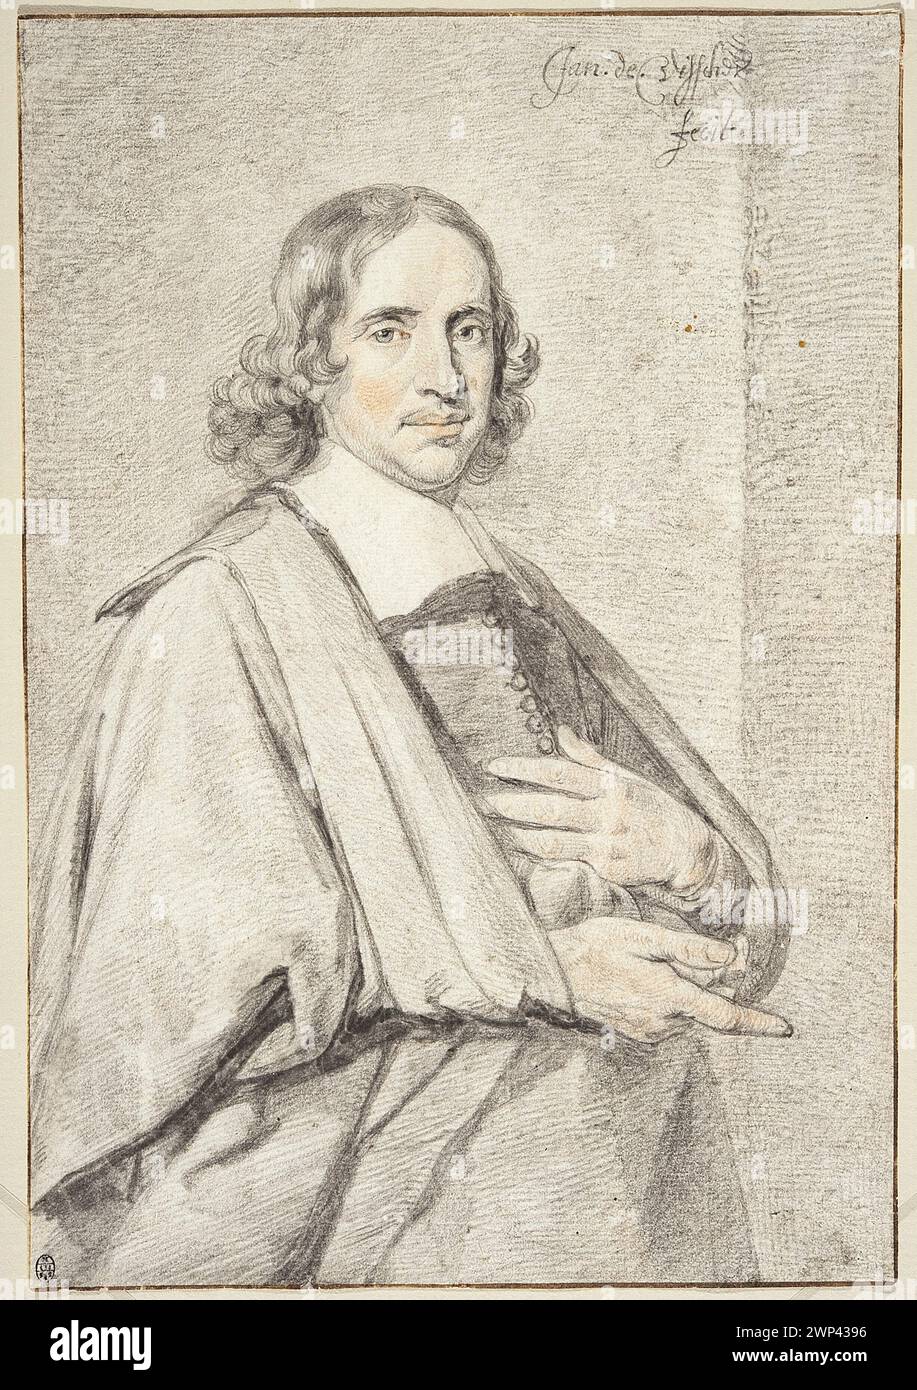 Portrait of Bernardus Somer preacher (1642-1684); Visscher, Jan de (Ca 1633/1634-1712); after 1671 (1671-00-00-1682-00-00);Bloch, Jan Gottlib (1836-1902), Bloch, Jan Gottlib (1836-1902)-collections, Mouriau, A. (fl. Ca 1801-1850), Mouriau, A. (Flow. Ca 1801-1850)-collections, collections, Somer, Bernardus (1642-1684), Society for the Encouragement of Fine Arts (Warsaw - 1860-1940) - collection, in the workshop of the Dutch master (National Museum in Warsaw - exhibition - 18.05.2017-20.08.2017), Kalwini, preachers, portraits, portraits, portraits, portraits, portraits Men's portraits, engraving Stock Photo